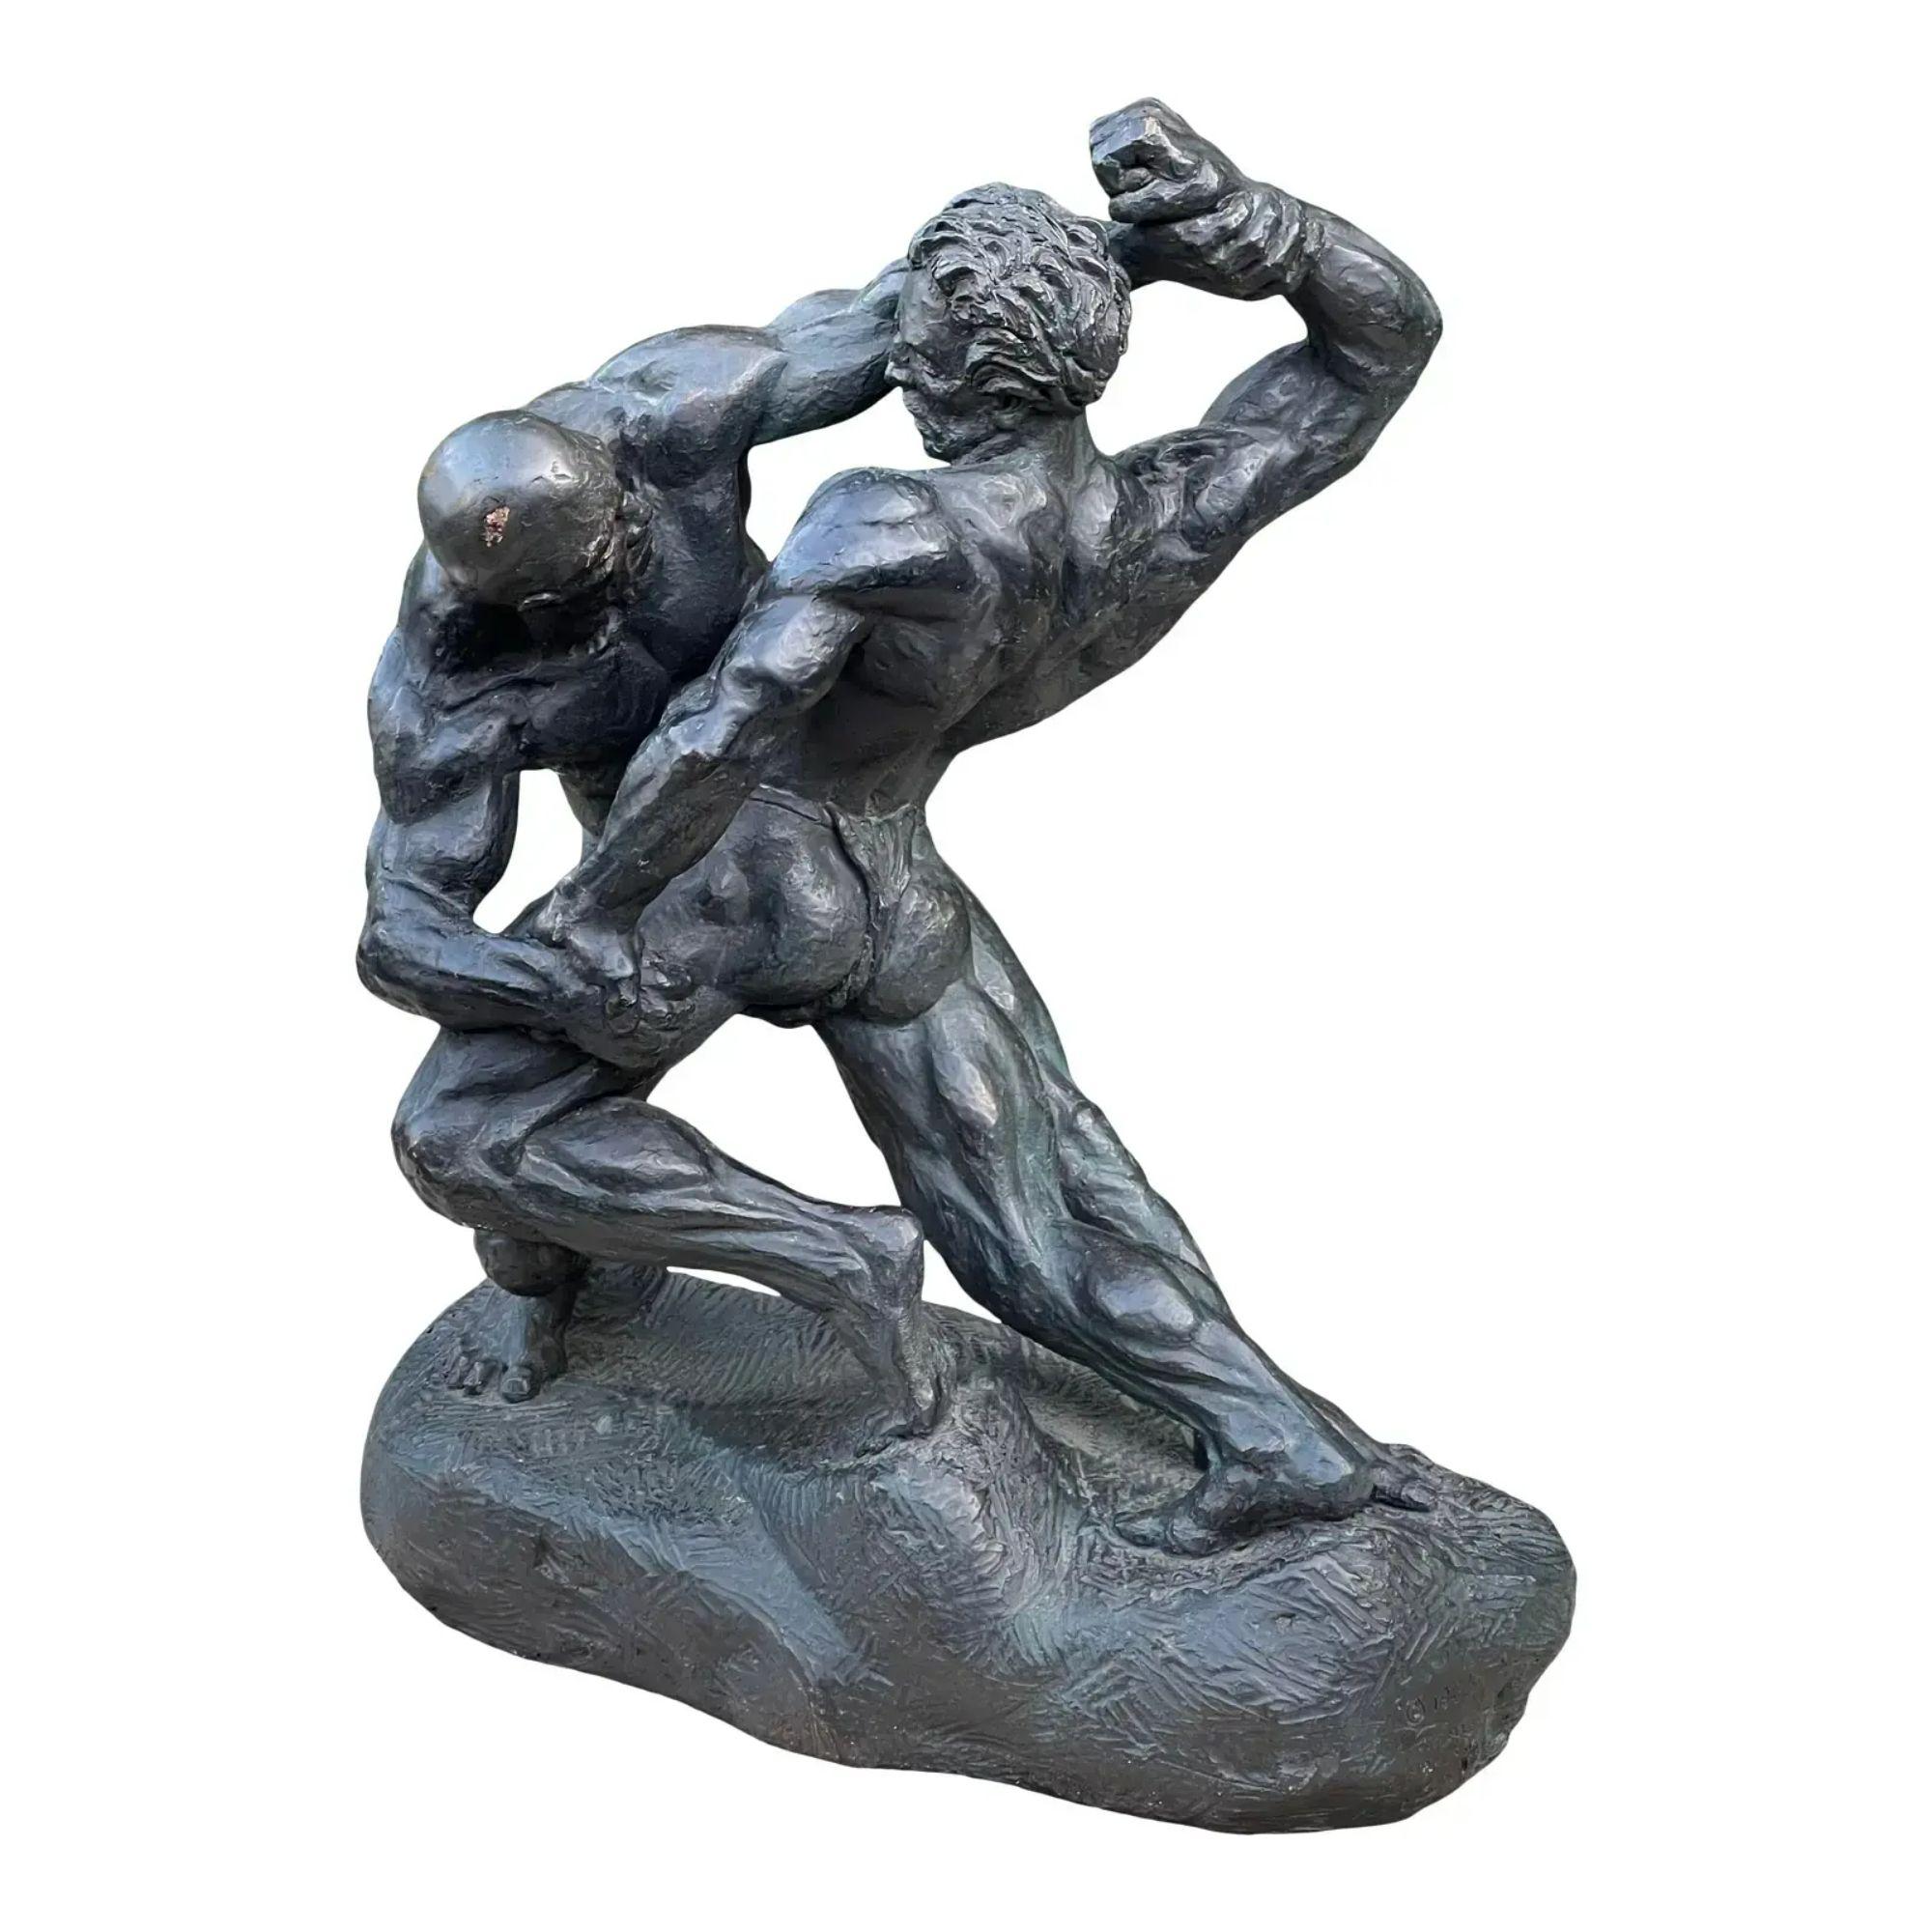 Male Nude composition sculpture of wrestlers. This lovely sculpture features two semi nude wrestler at combat. It has a patinated bronze painted finish but it is in fact composition.

Additional information:
Materials: Paint
Color: Brown
Art